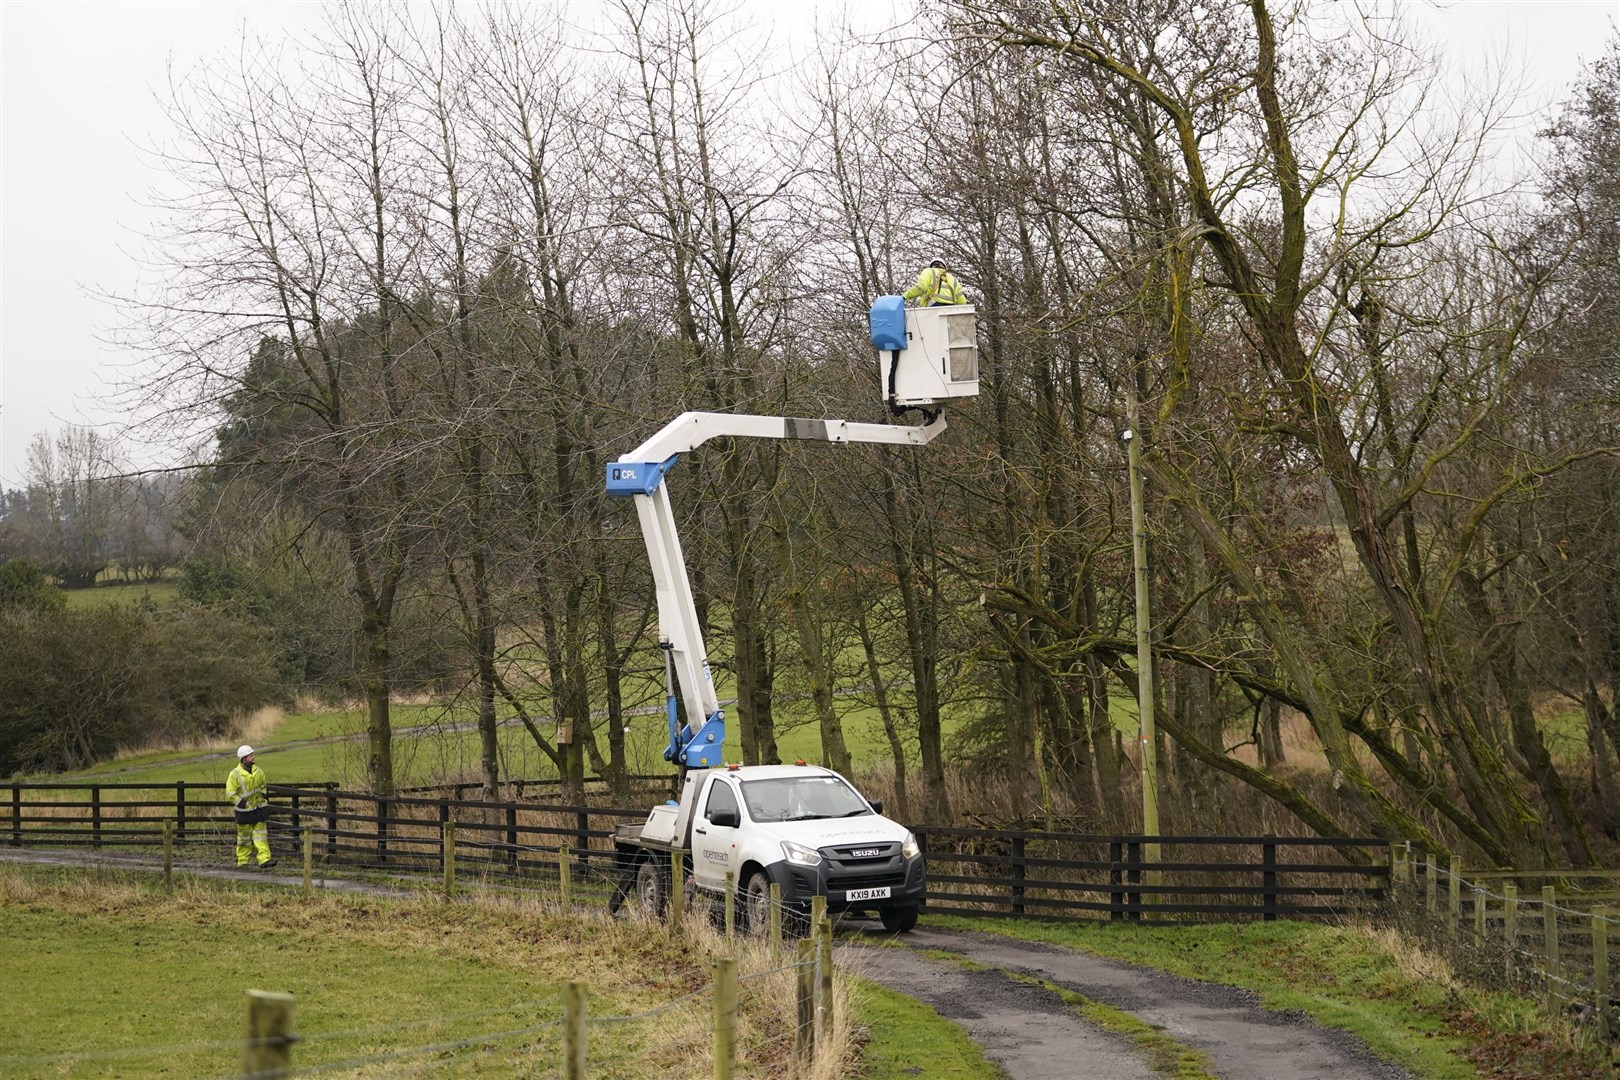 An Openreach engineer fixes telephone lines near Barnard Castle in County Durham (Danny Lawson/PA)